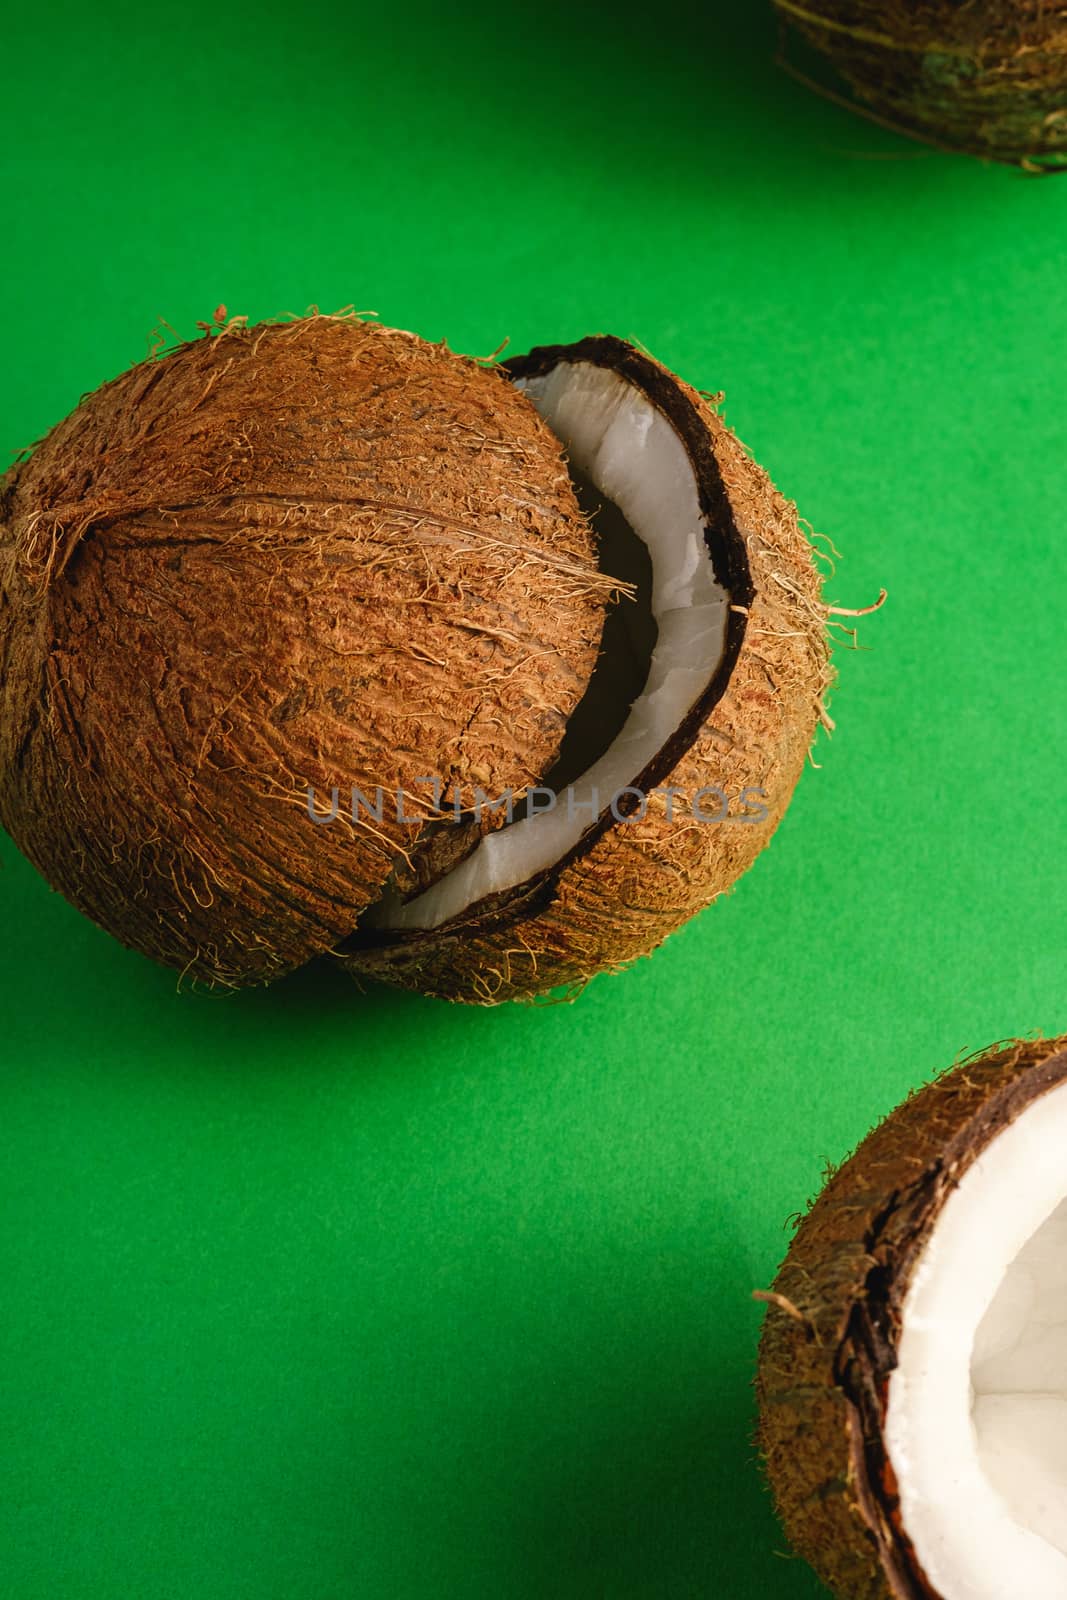 Coconut fruits on green plain background, abstract food tropical concept, angle view